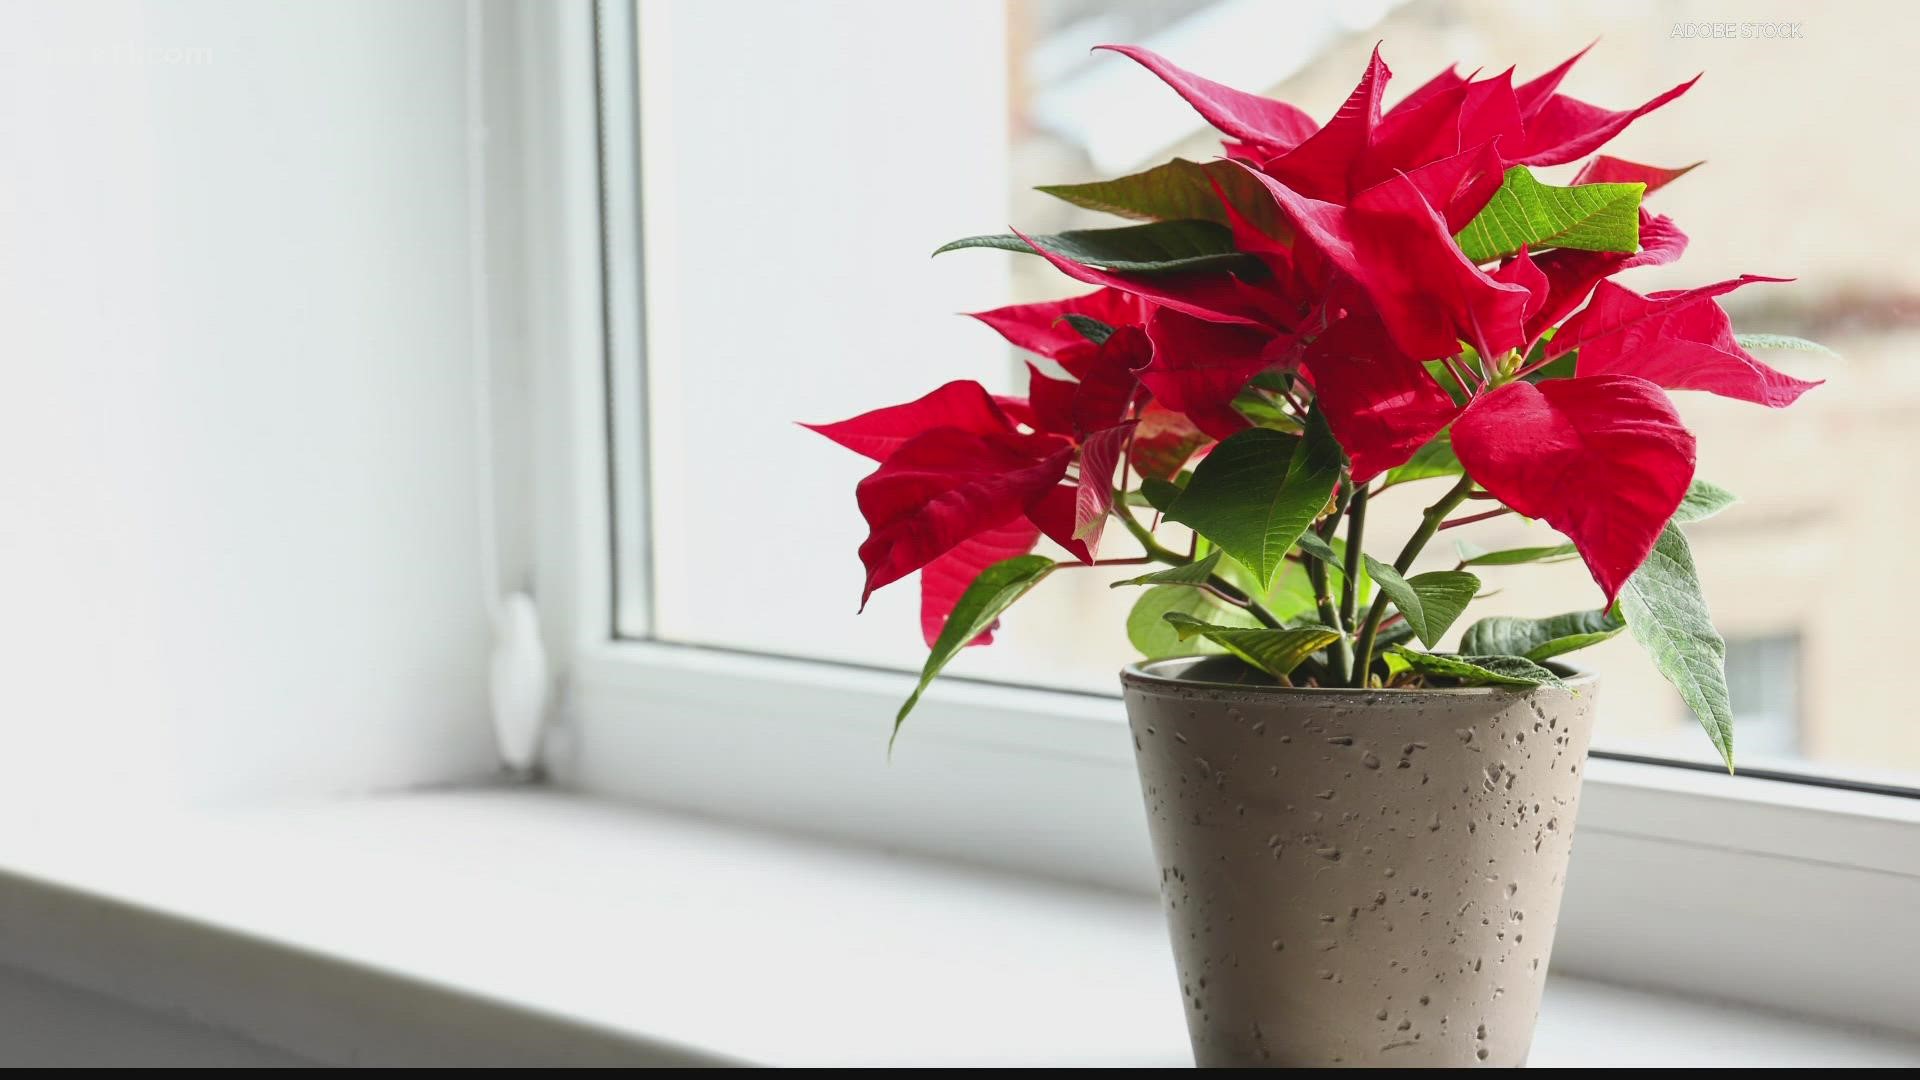 Poinsettias are everywhere this time of year. Bobby and Laura have tips on how to keep your happy and healthy through the holiday season and beyond!